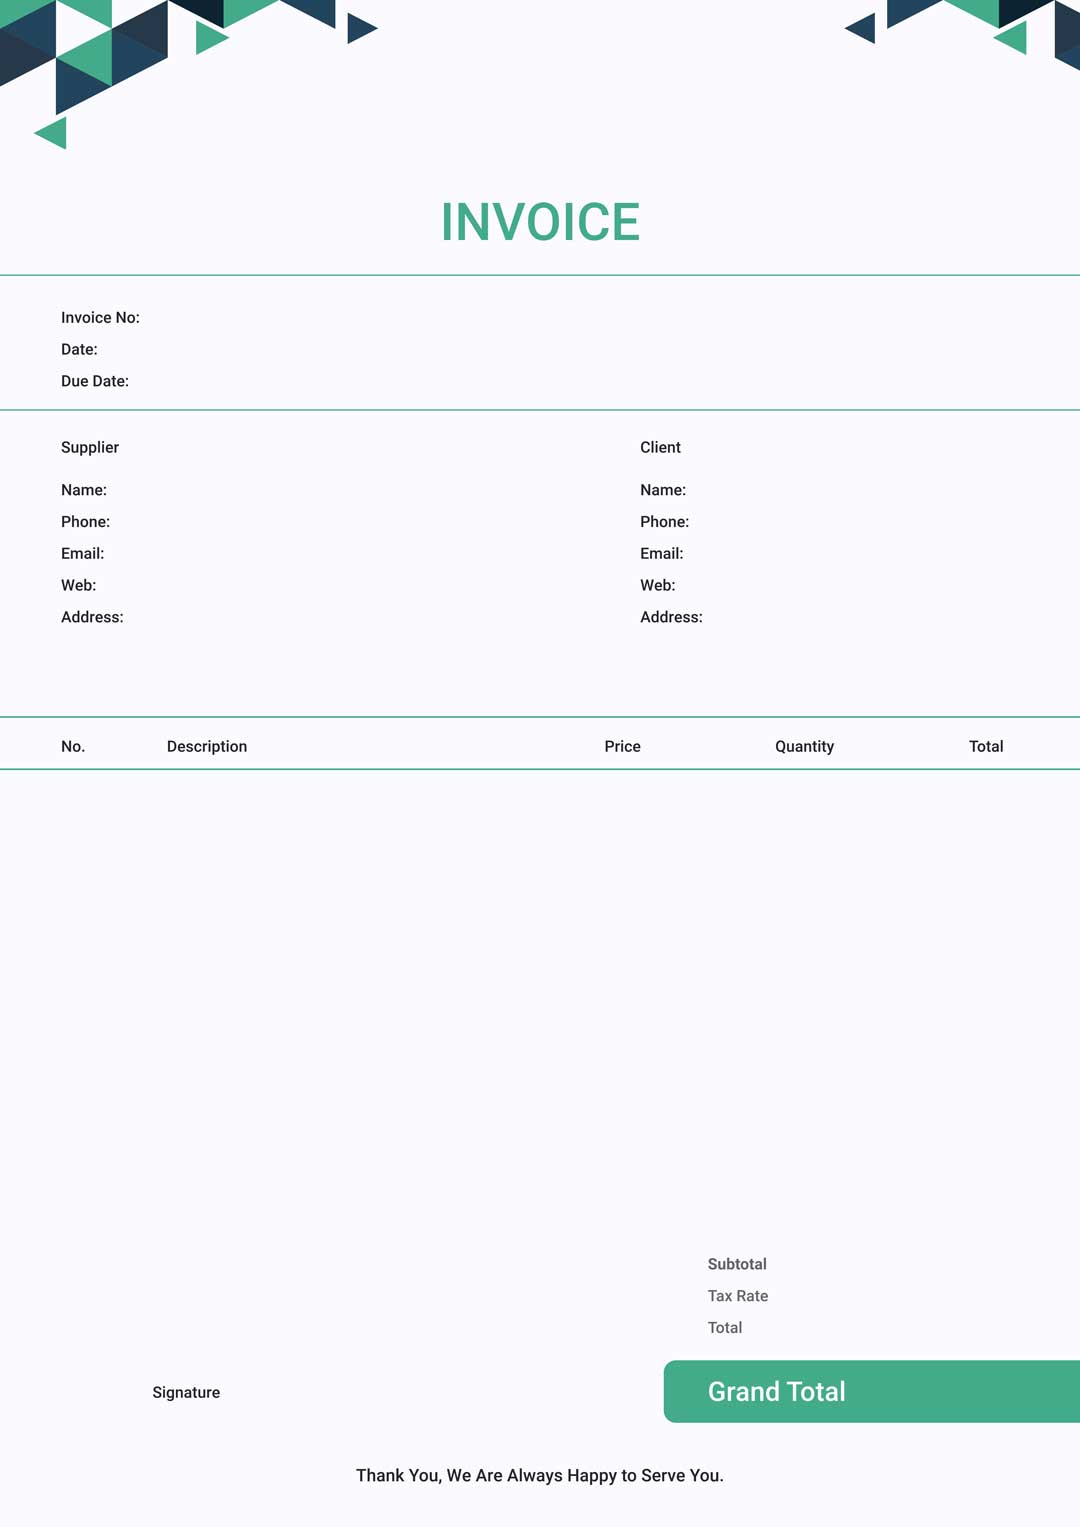 invoice-template-uk-excel-invoice-example-blank-invoice-template-pdf